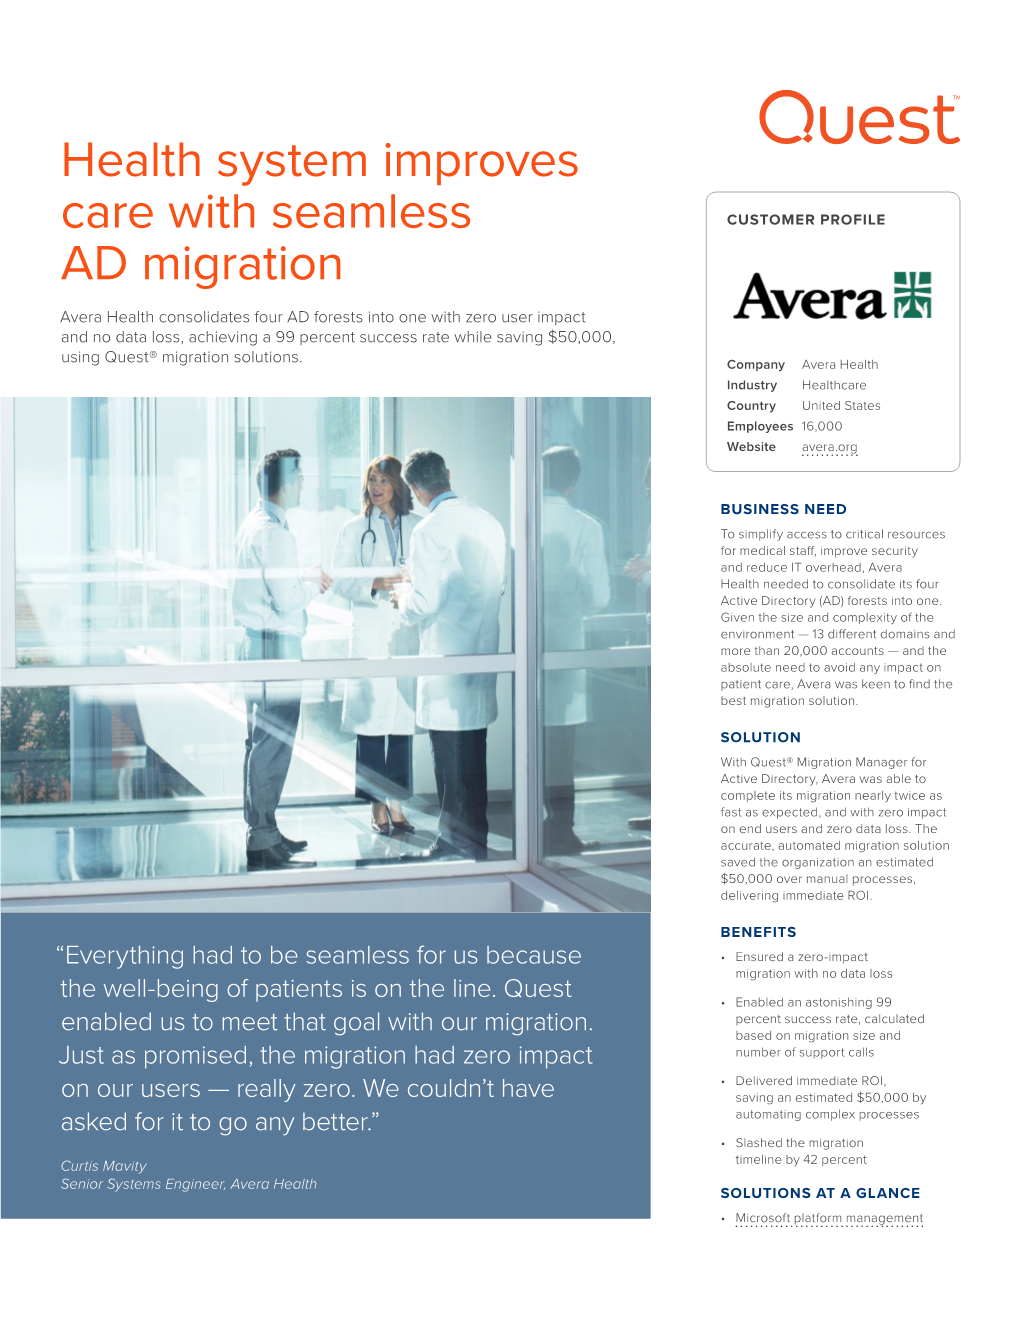 Health System Improves Care with Seamless AD